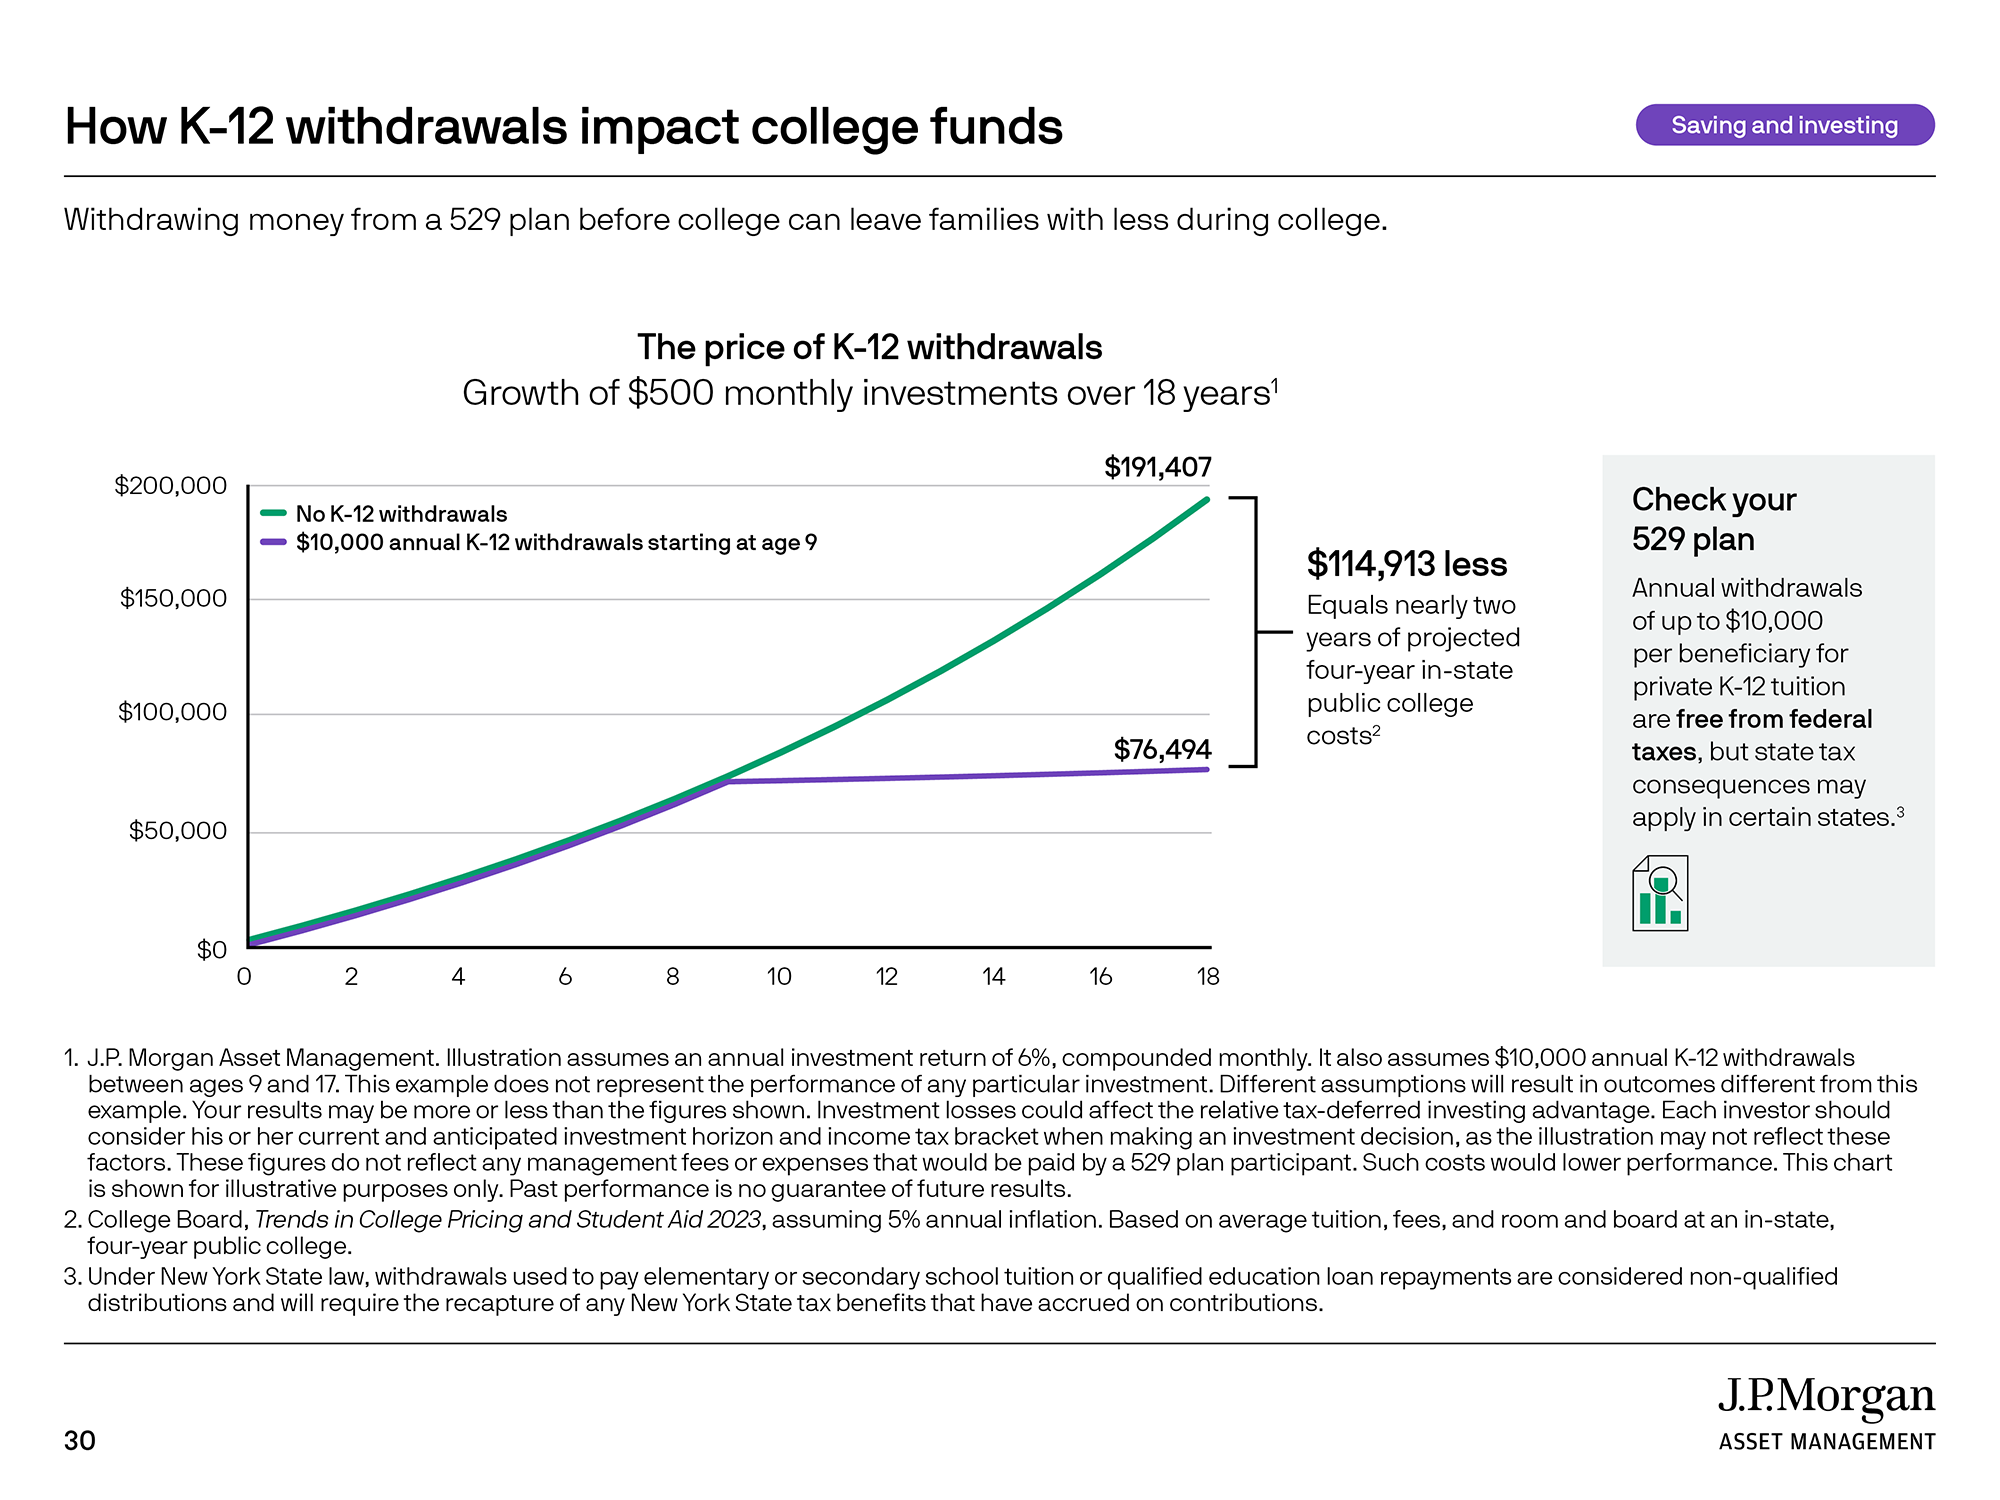 How K-12 withdrawals impact college funds